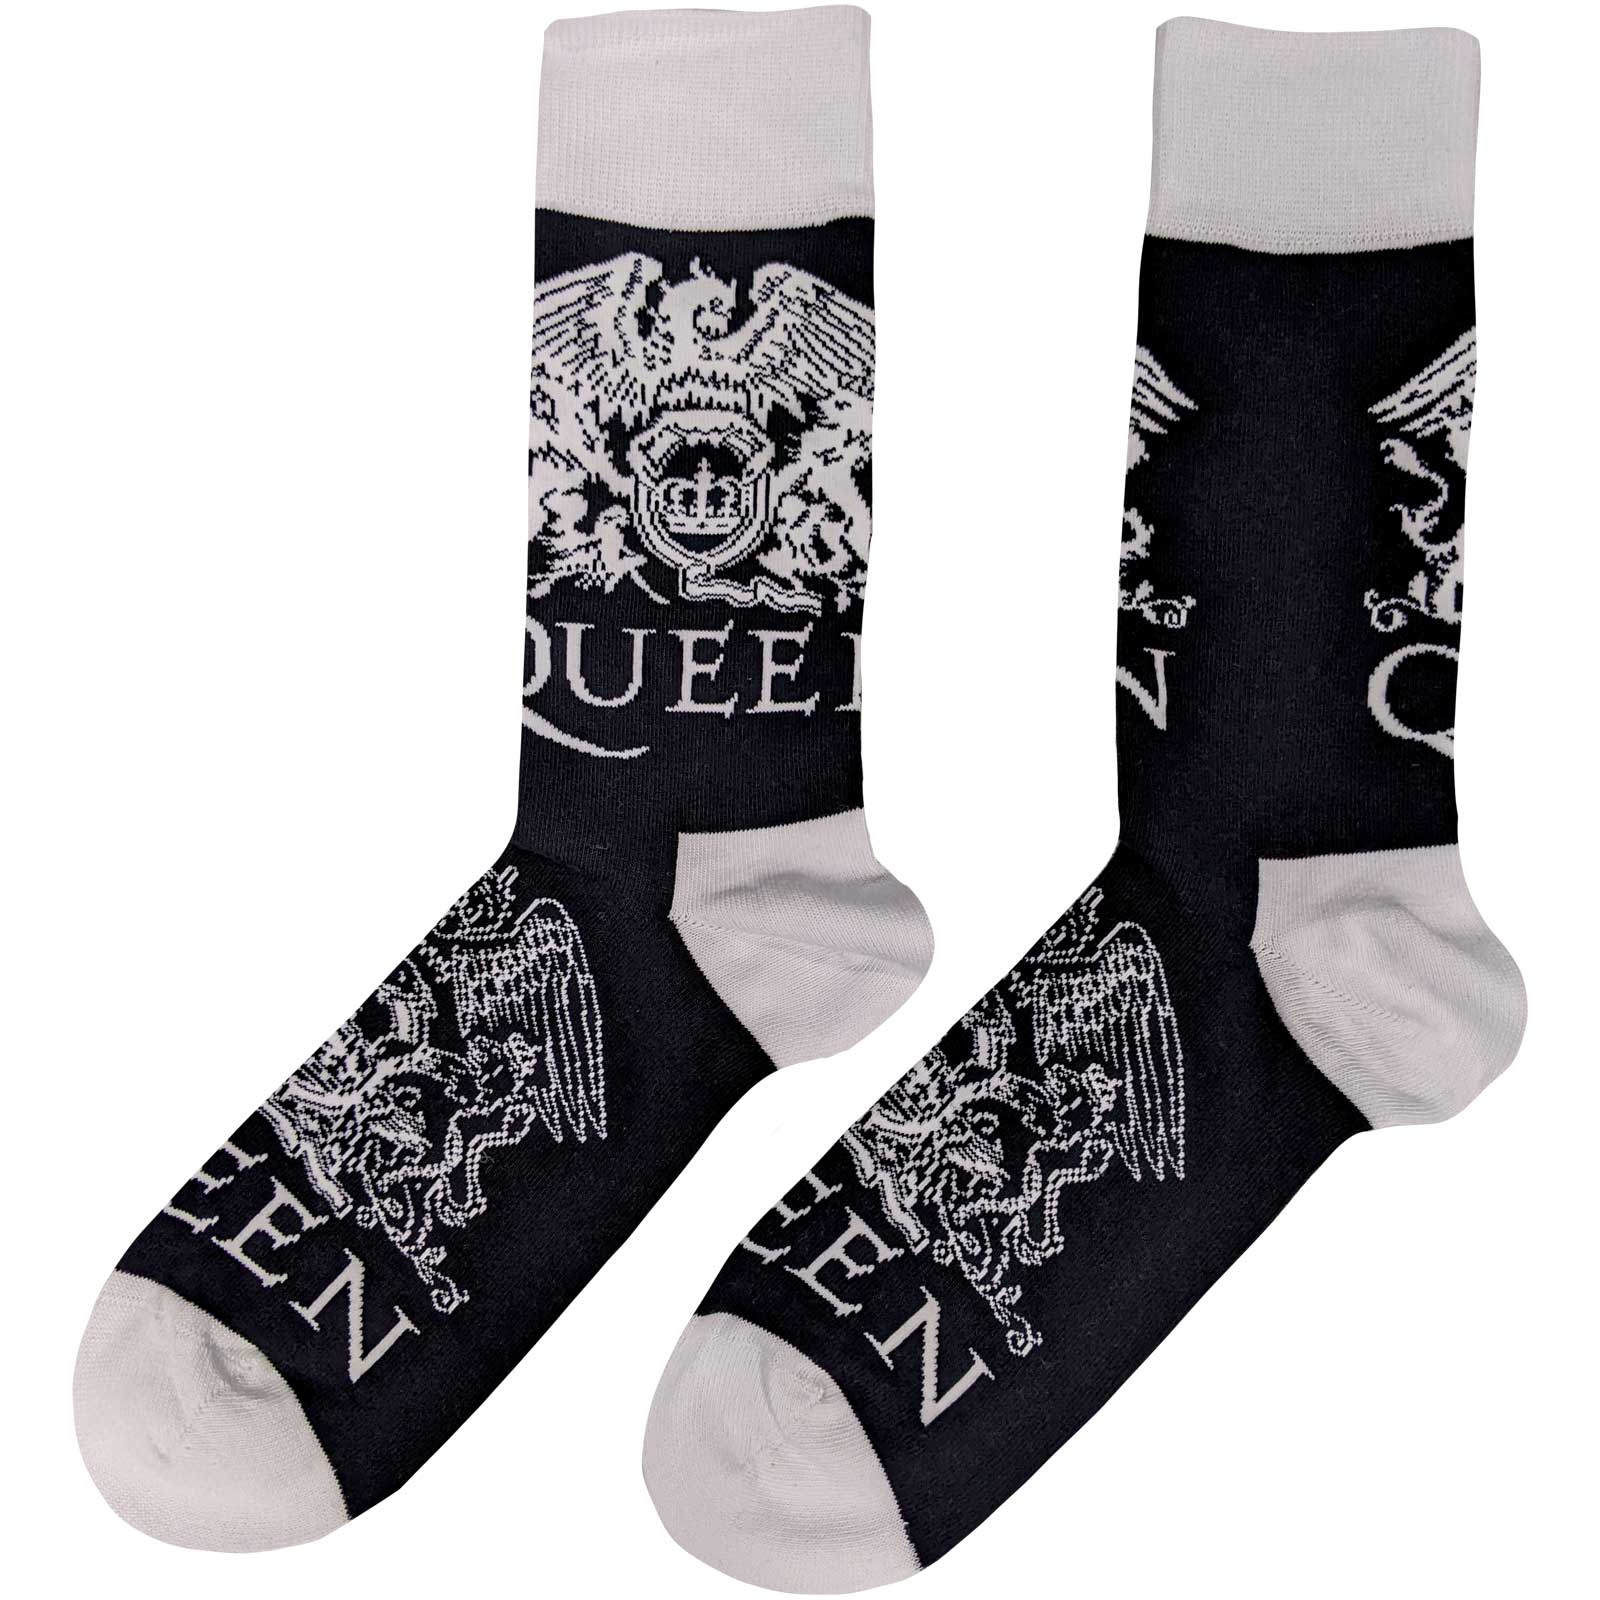 Queen Unisex Ankle Socks - White Crests (UK Size 7-11)